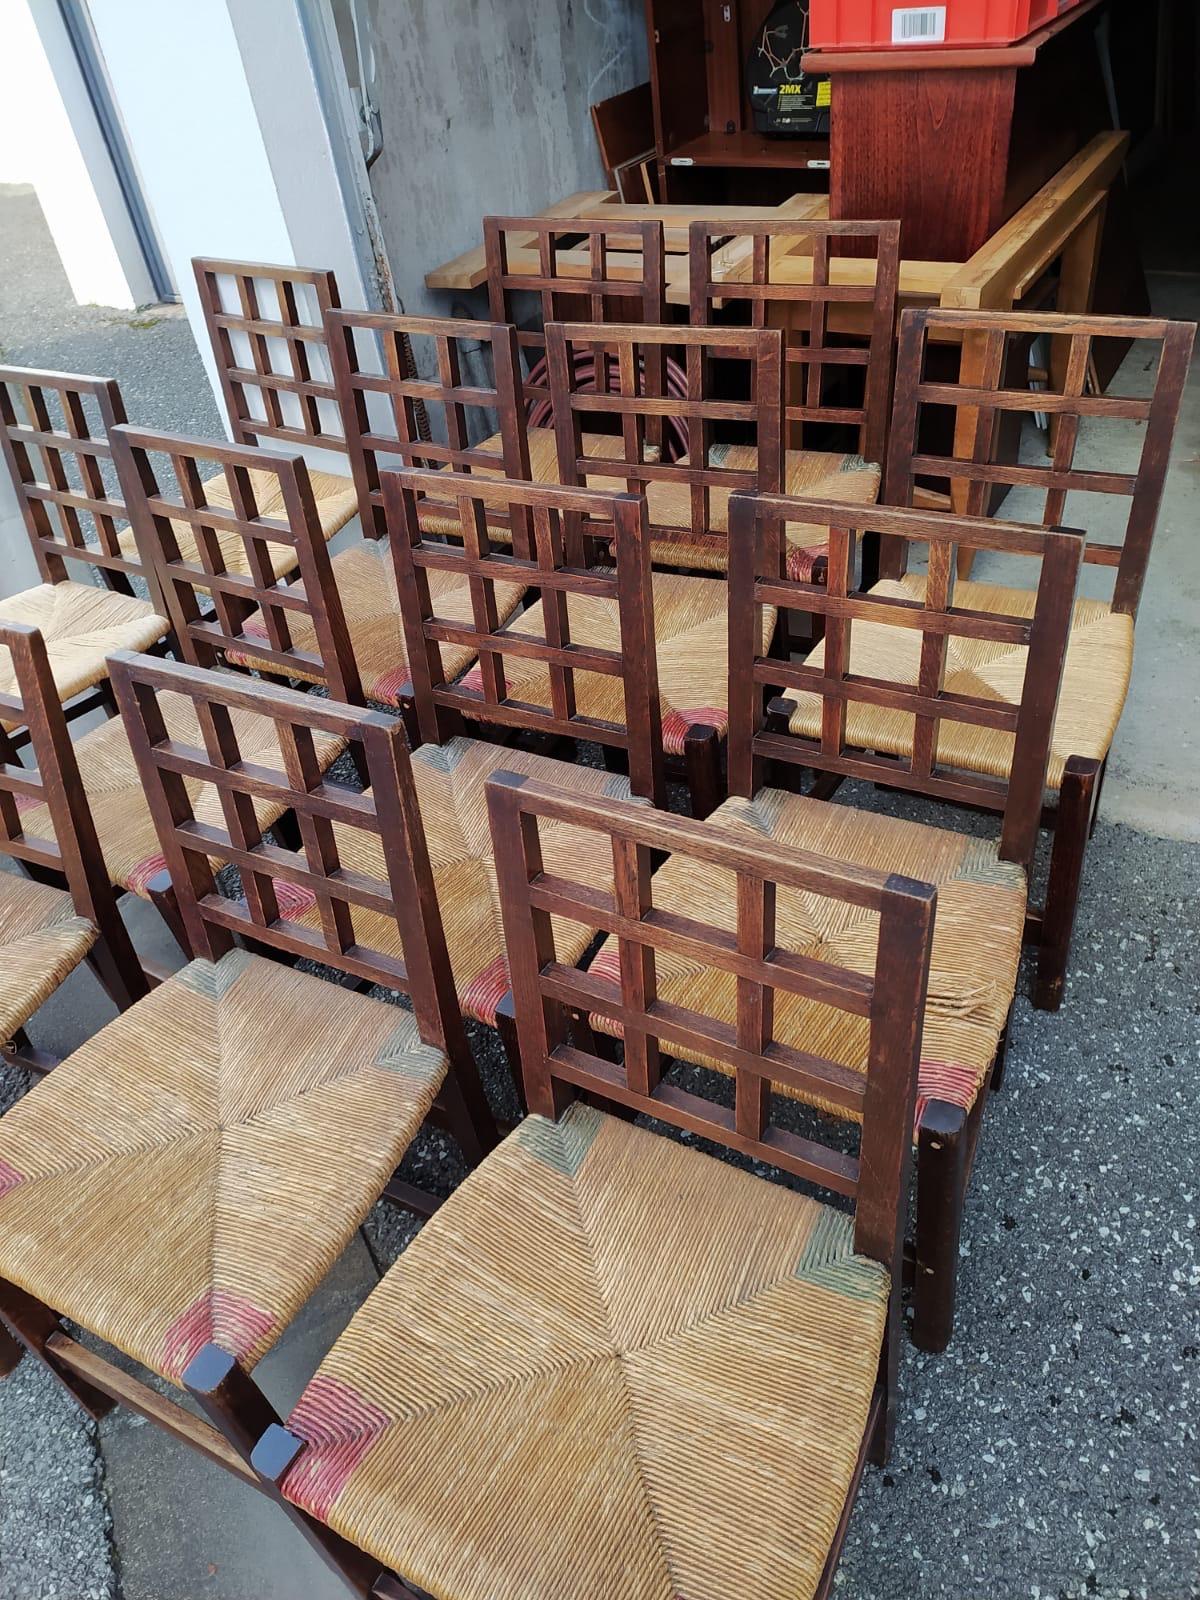 Set of twelve chairs designed by Victor Courtray (1896-1987)
School of Maurice Dufrene, Paul Follot,
chairs with the original straw for 10 and 2 redone.